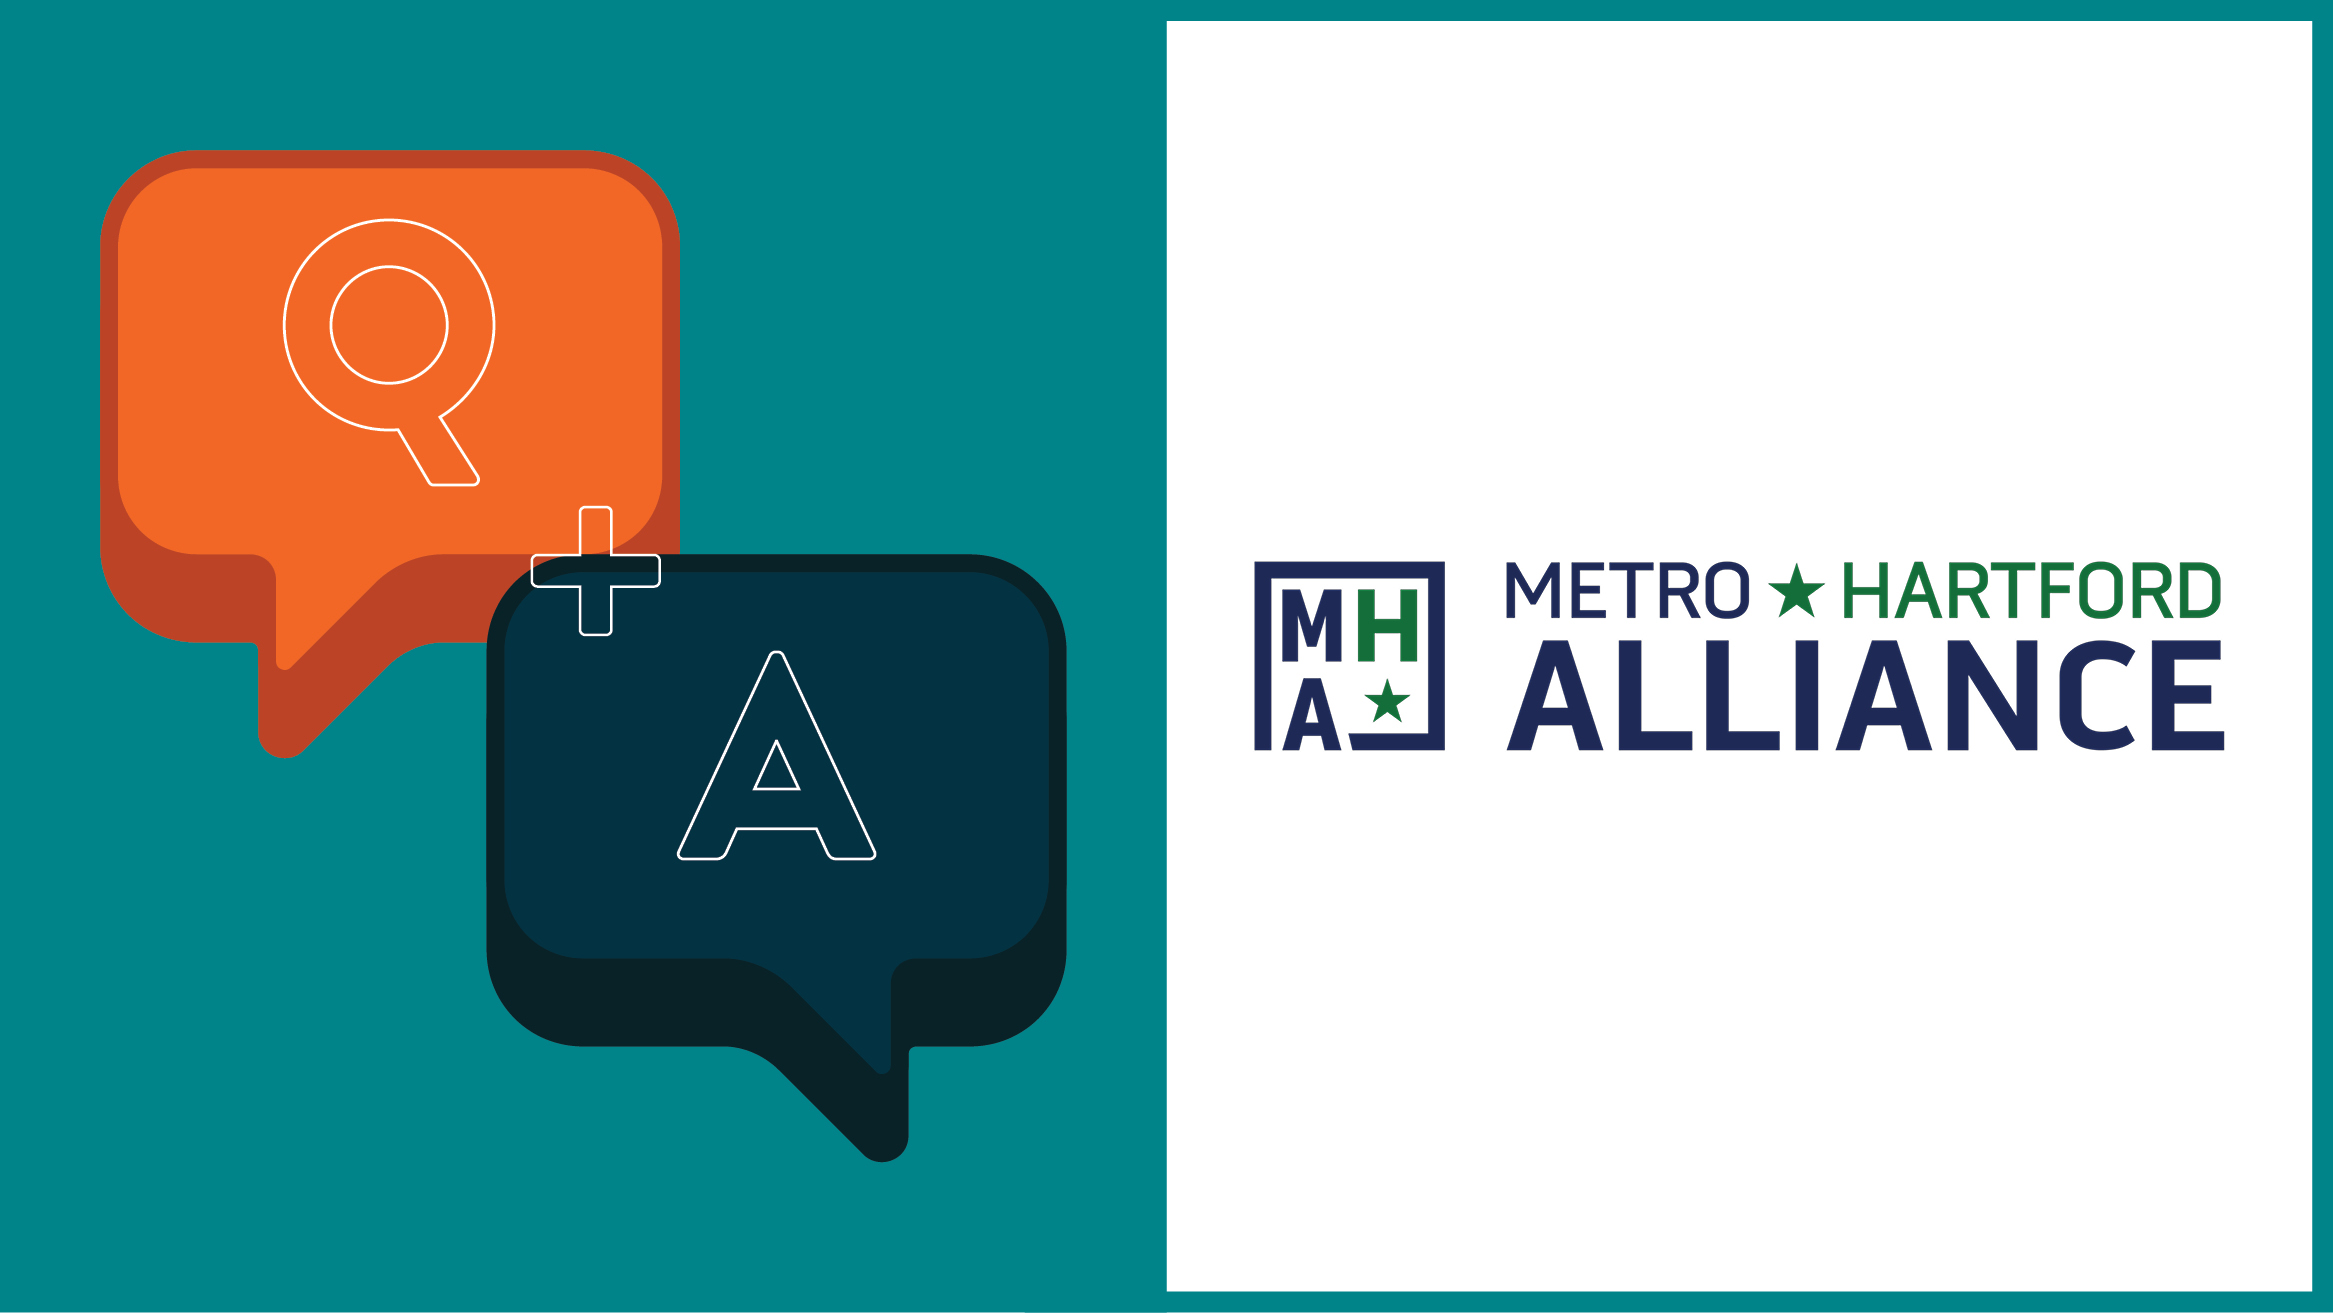 Metro Hartford Alliance logo paired with Q and A in thought bubbles